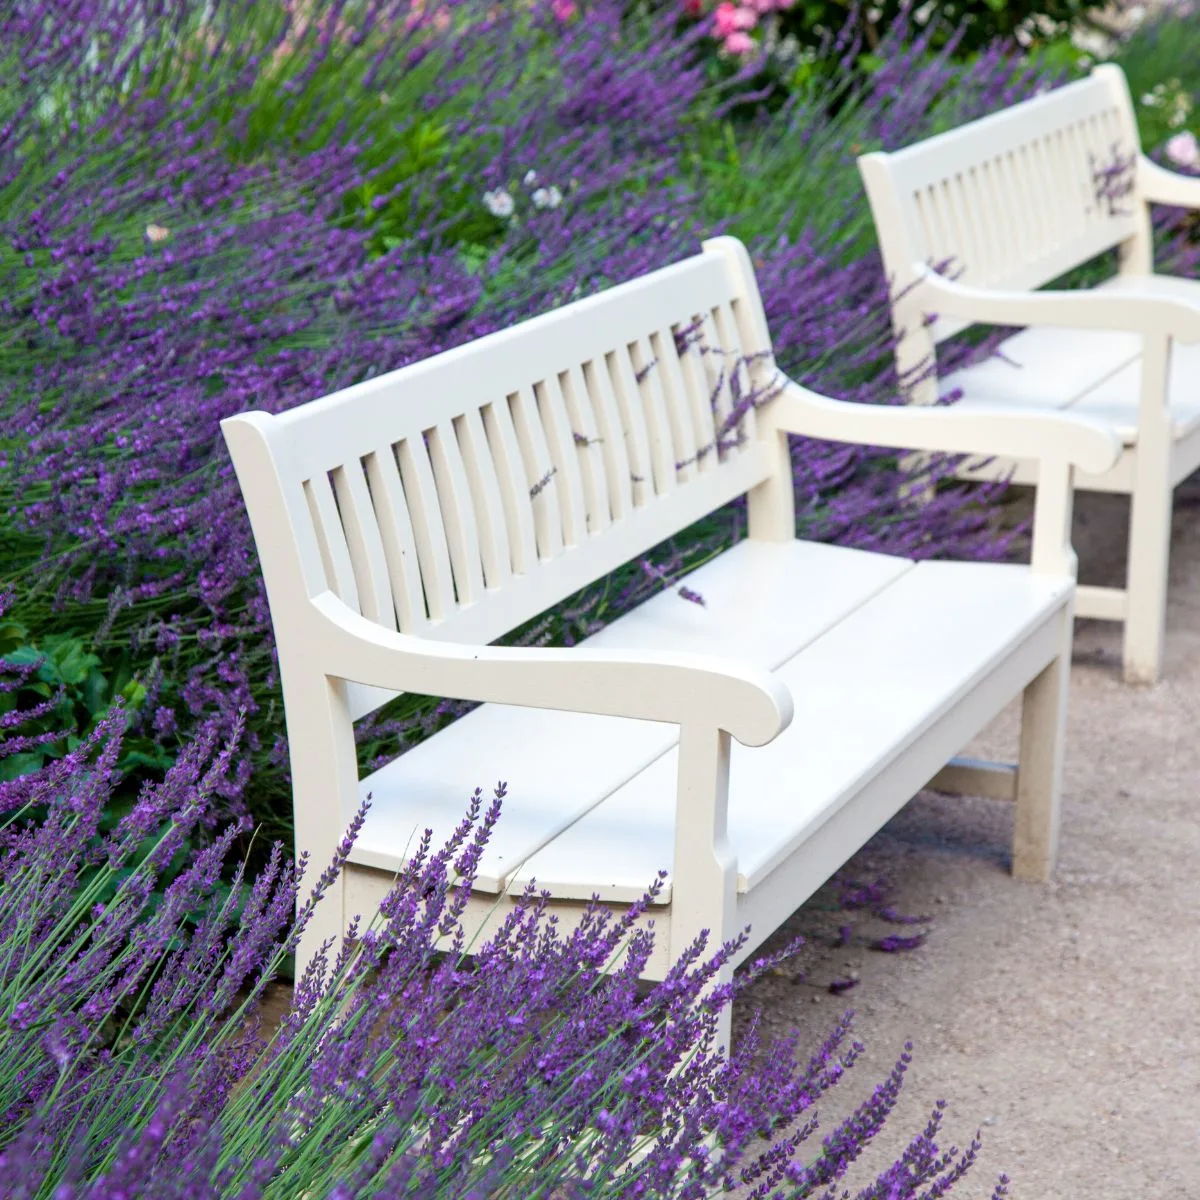 White benches surrounded by deep purple lavender flowers.